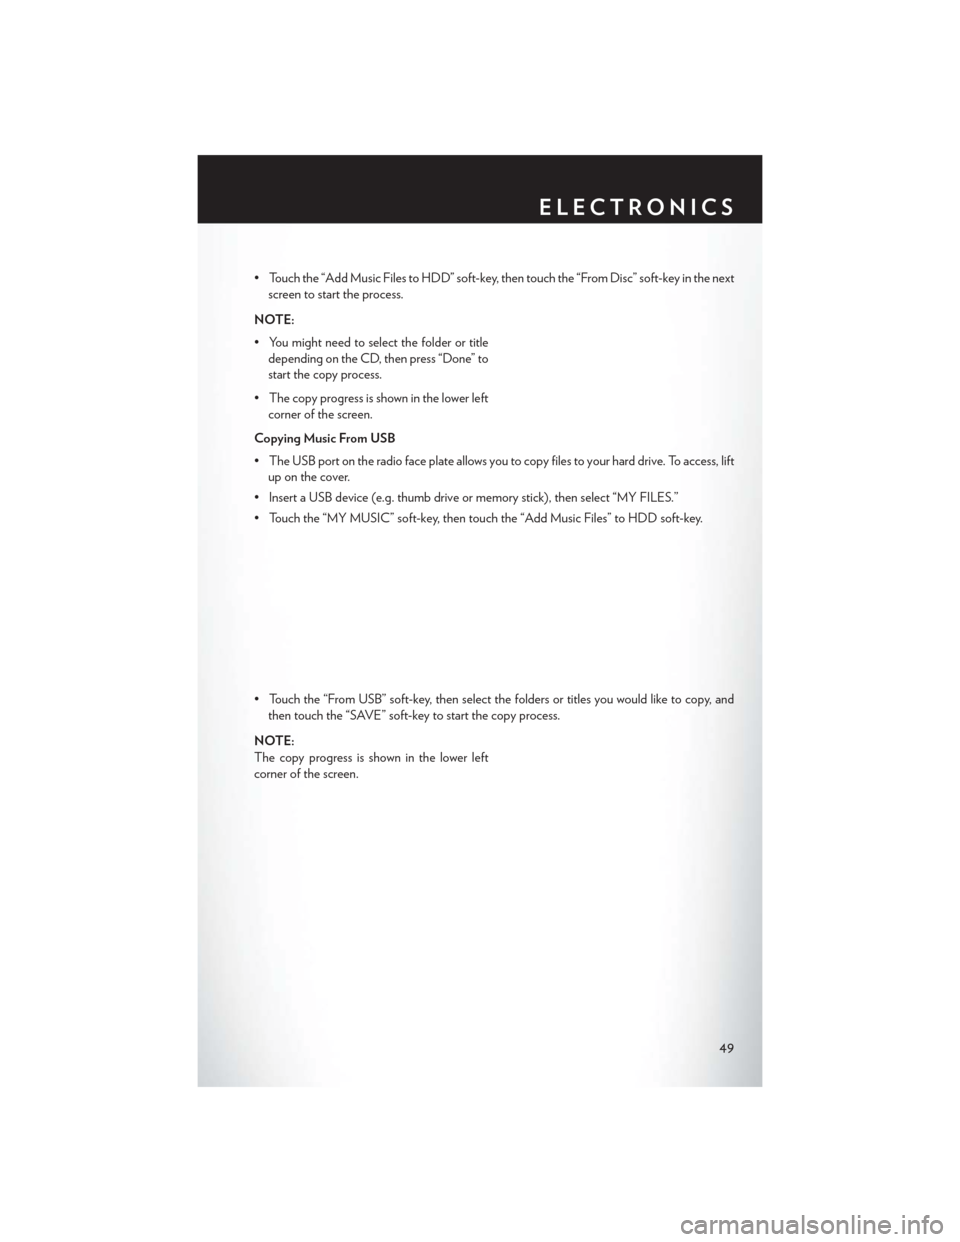 CHRYSLER 200 2014 1.G Workshop Manual • Touch the “Add Music Files to HDD” soft-key, then touch the “From Disc” soft-key in the nextscreen to start the process.
NOTE:
• You might need to select the folder or title depending on